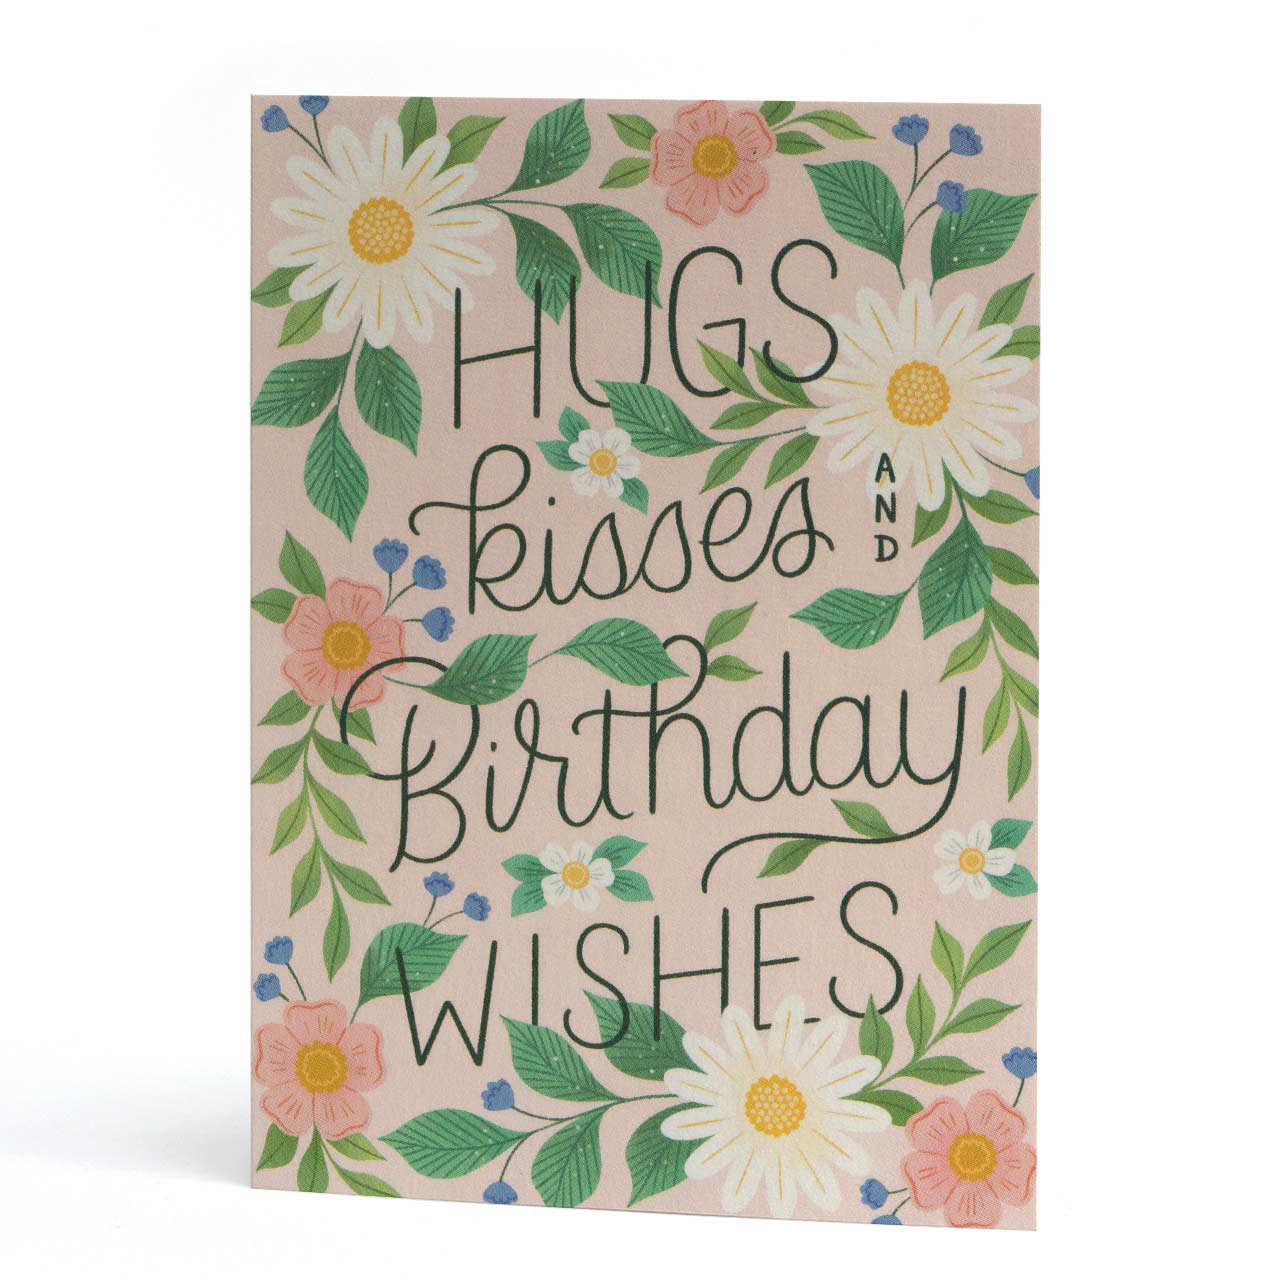 Hugs, Kisses and Birthday Wishes Greeting Card